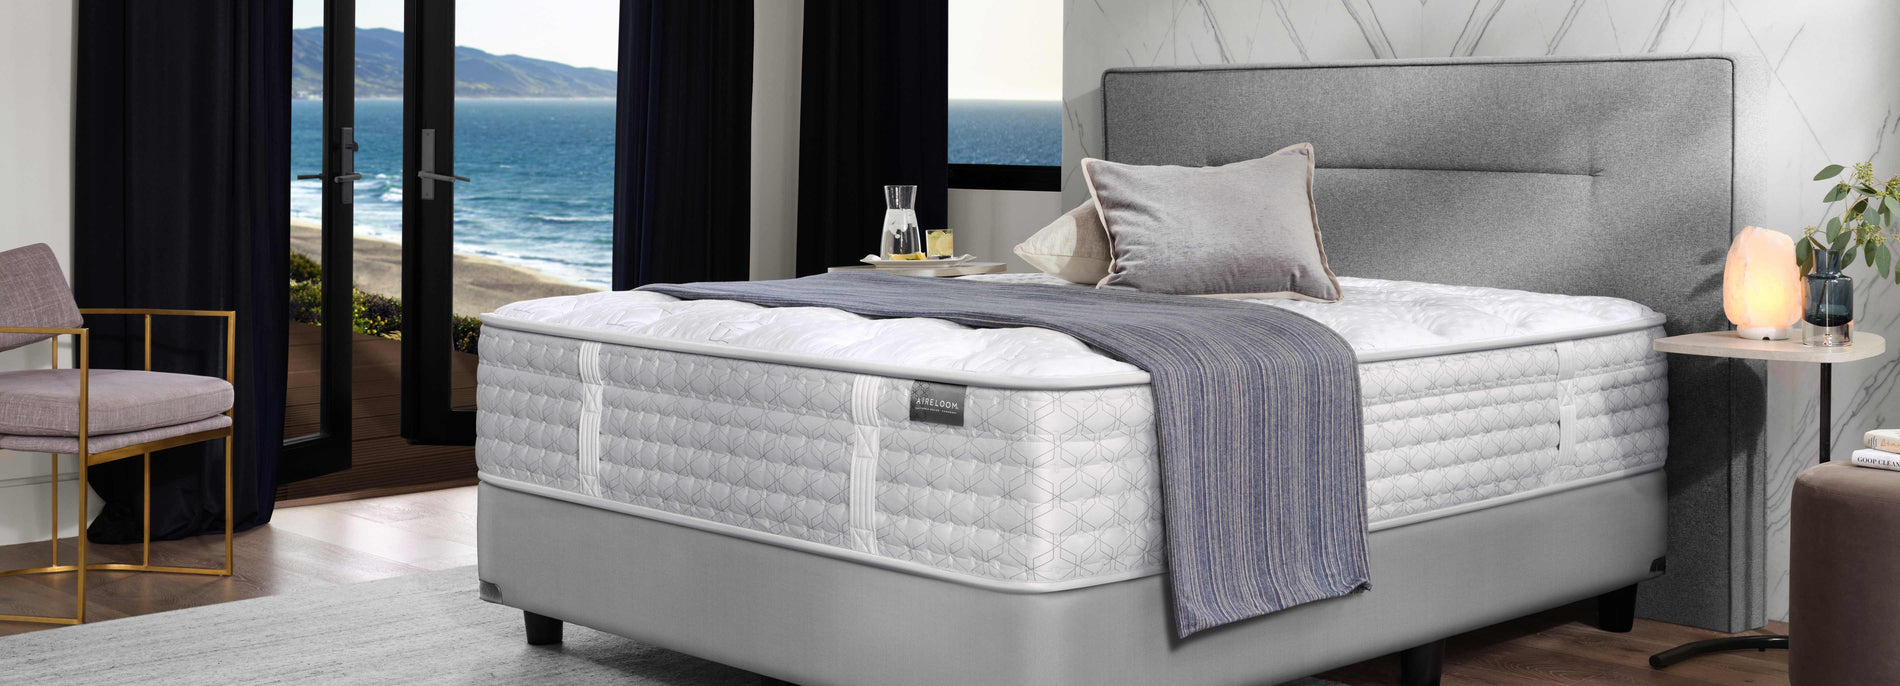 Aireloom Mattress on top of a gray upholstered bed frame